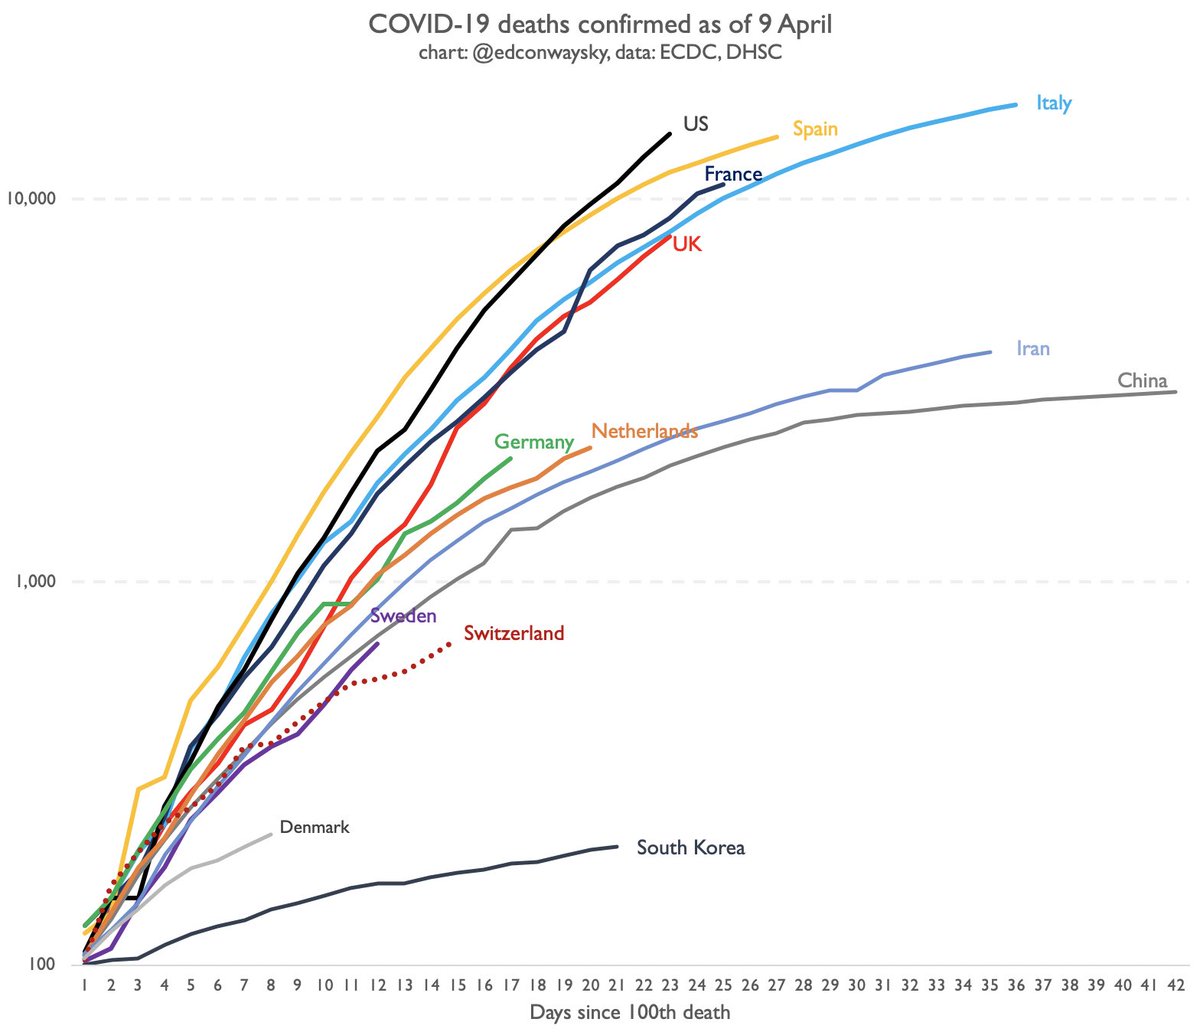 Following  @DominicRaab's announcement that UK  #COVID19 death toll has reached 7,978, here’s today’s update on trajectories- UK line now within a whisker of overtaking Italy - Eg at this stage in their outbreak Italian deaths were rising less quickly than in UK